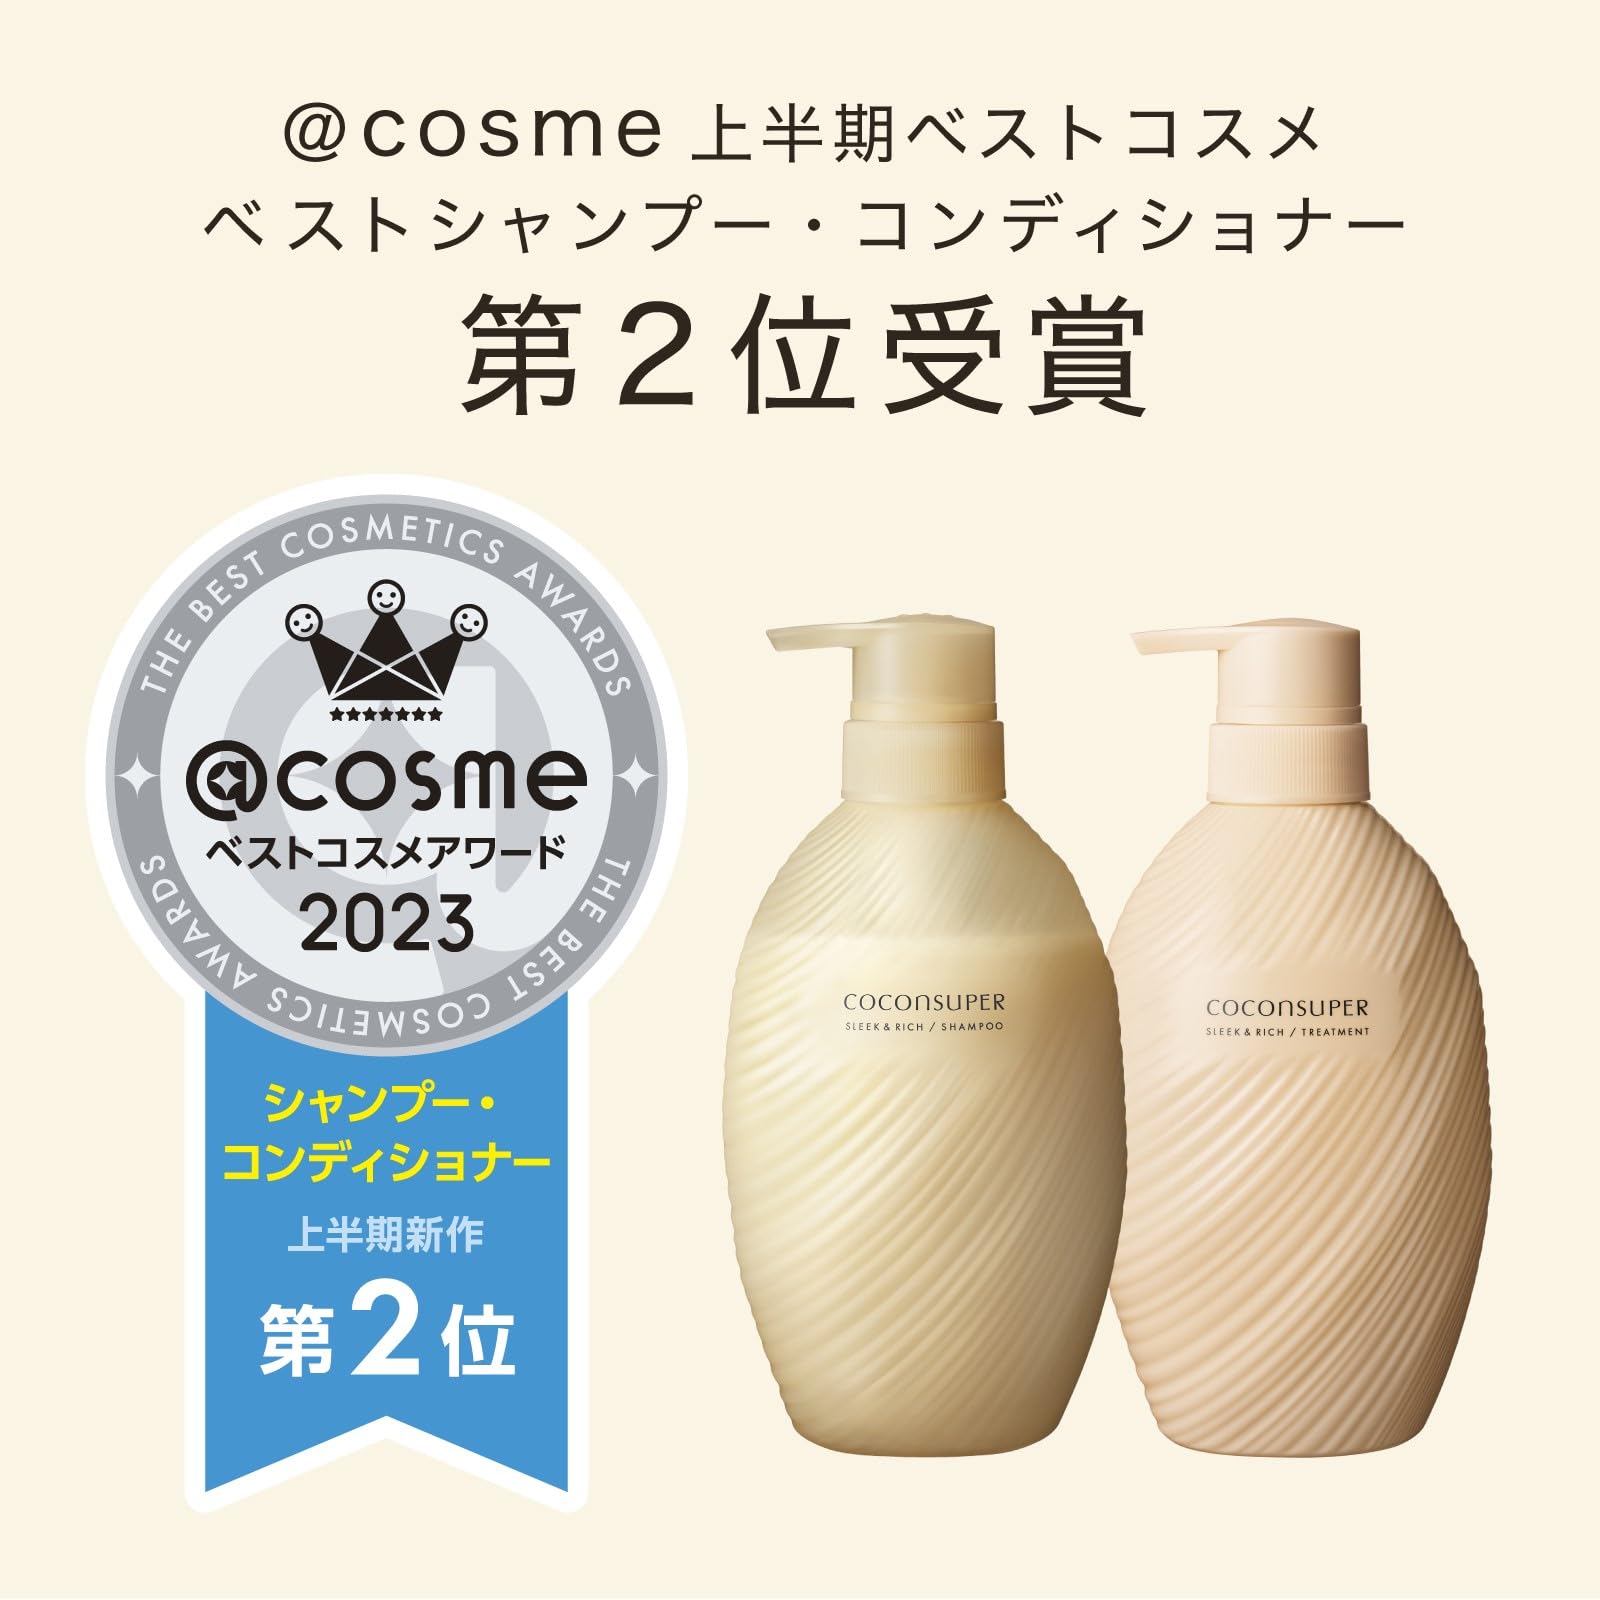 Coconsuper Kracie Airy Bloom/ Sleek & Rich Shampoo/ Treatment/ Mask Exclusive from Japan